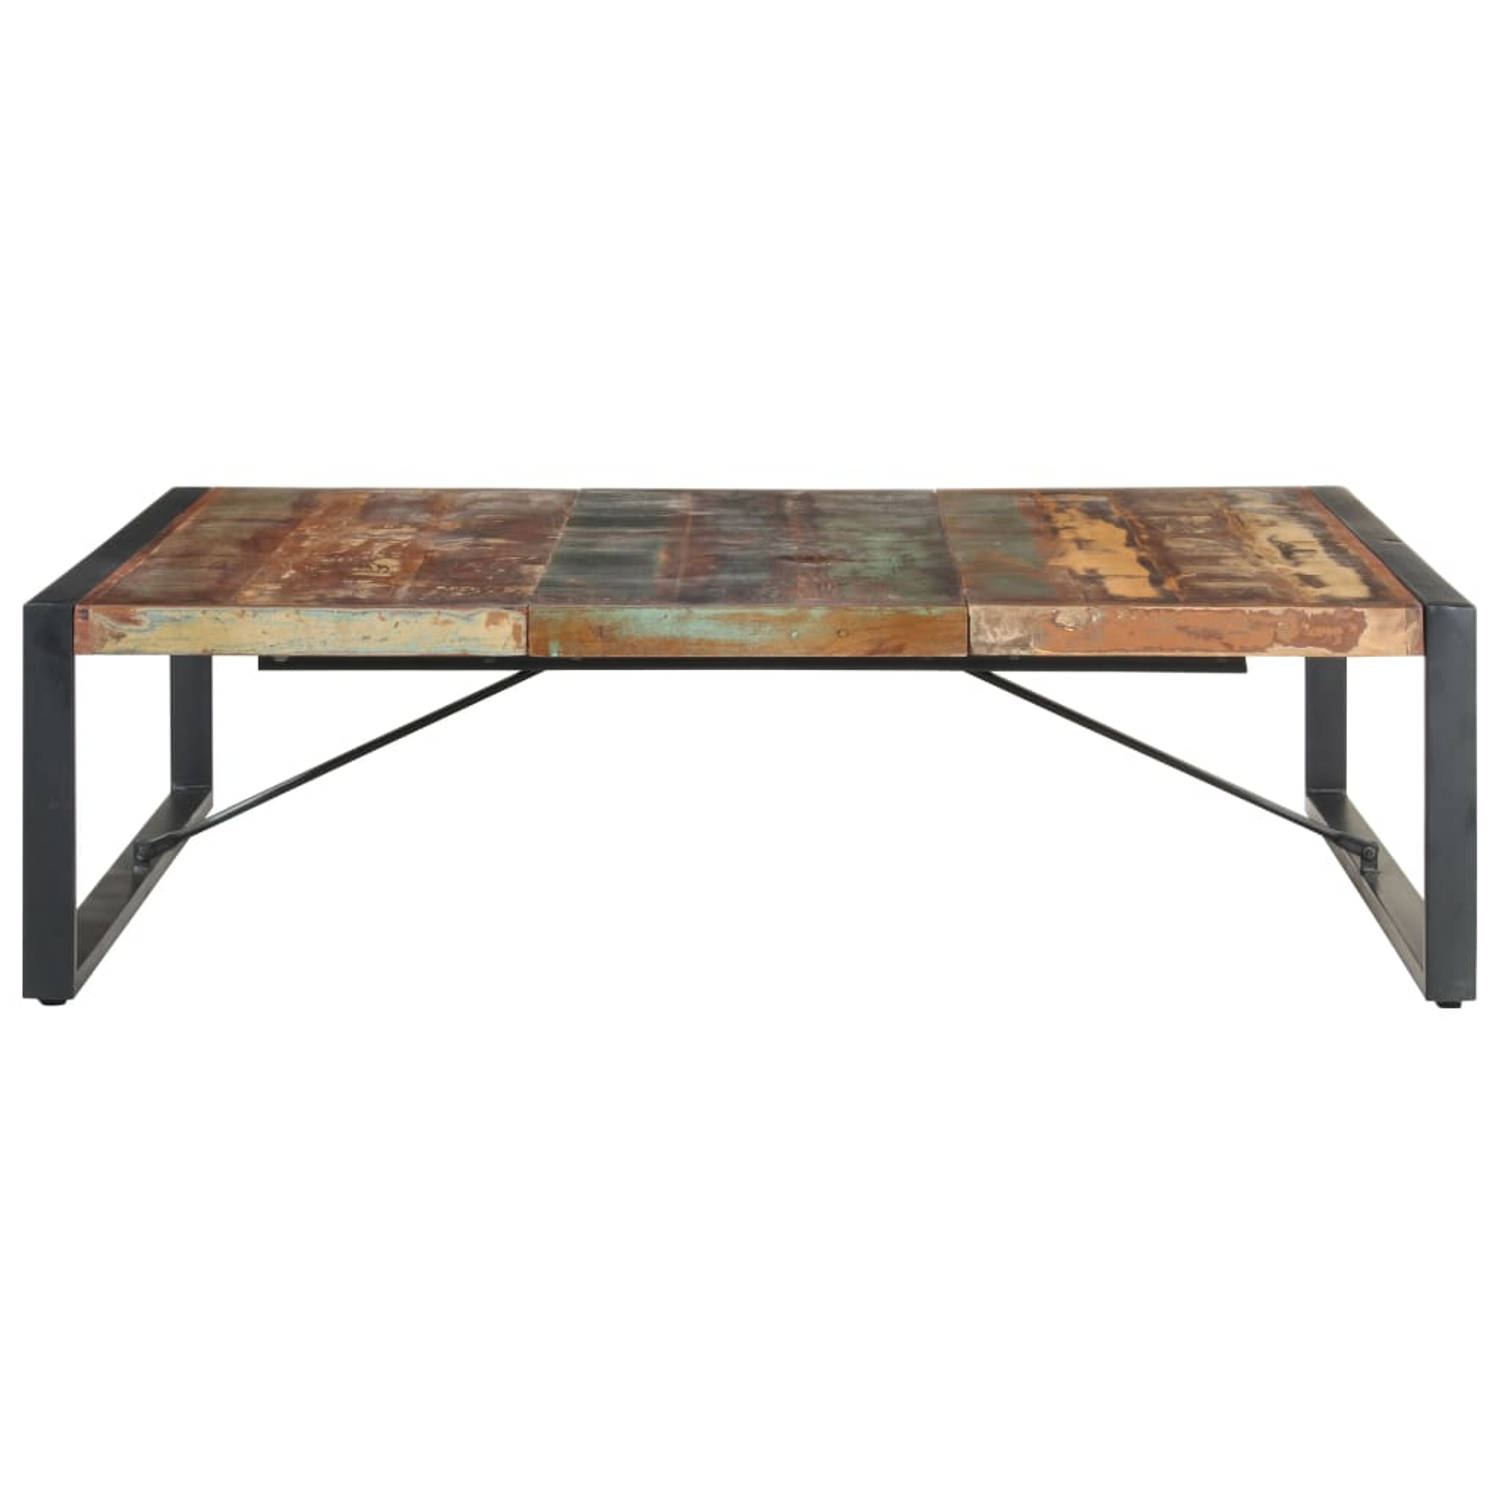 The Living Store Salontafel 140x140x40 cm massief gerecycled hout - Tafel